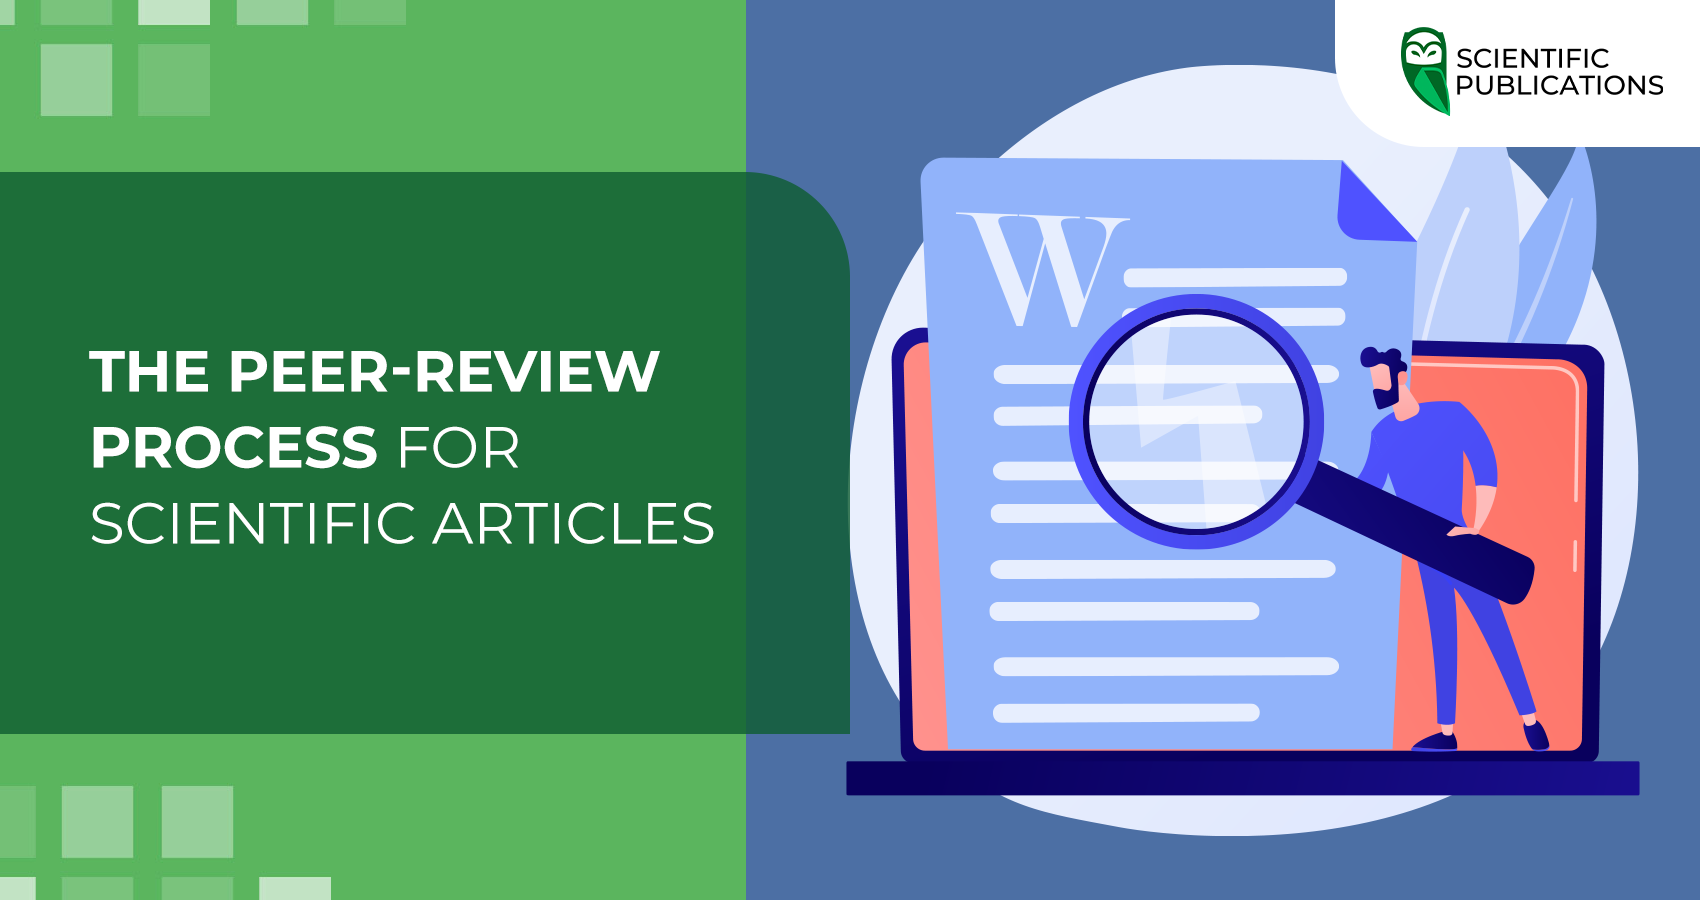 The peer-review process for scientific articles